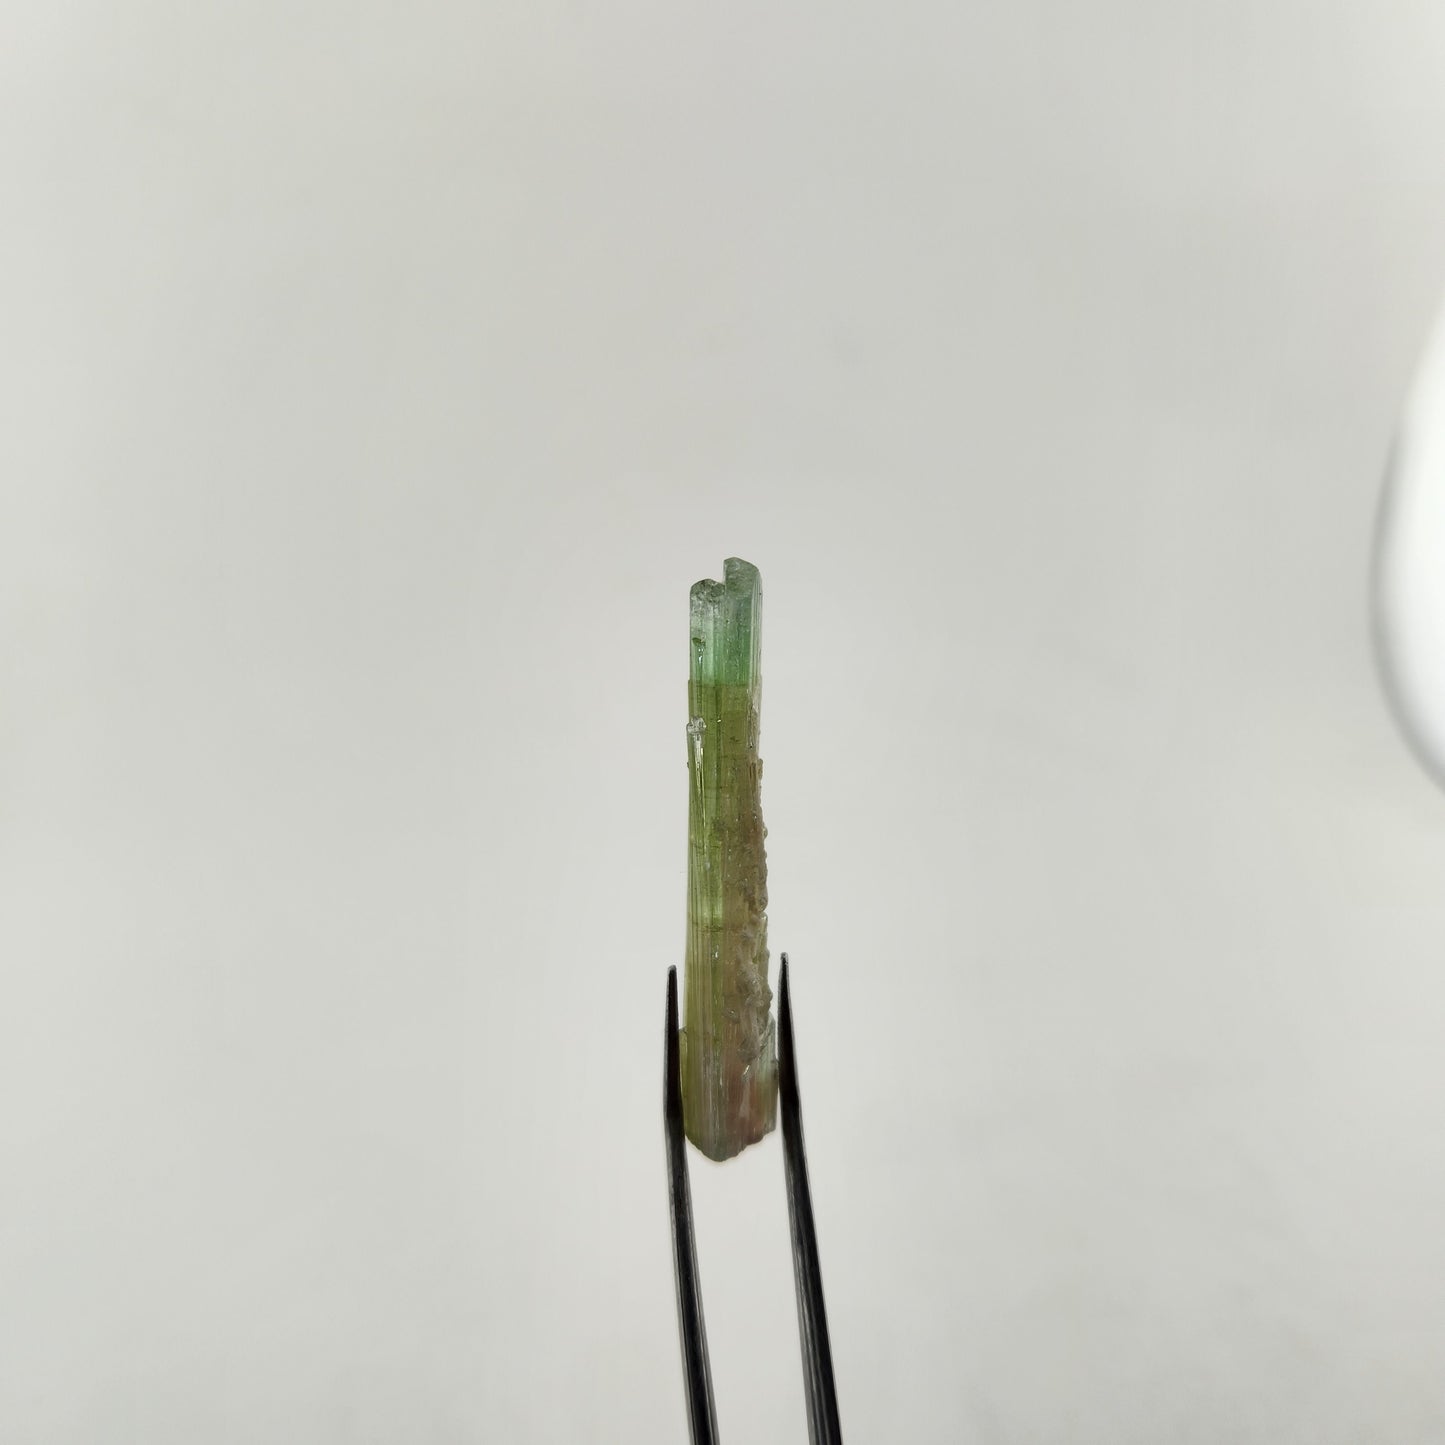 Bi-Colored Blue and Green Tourmaline Crystal